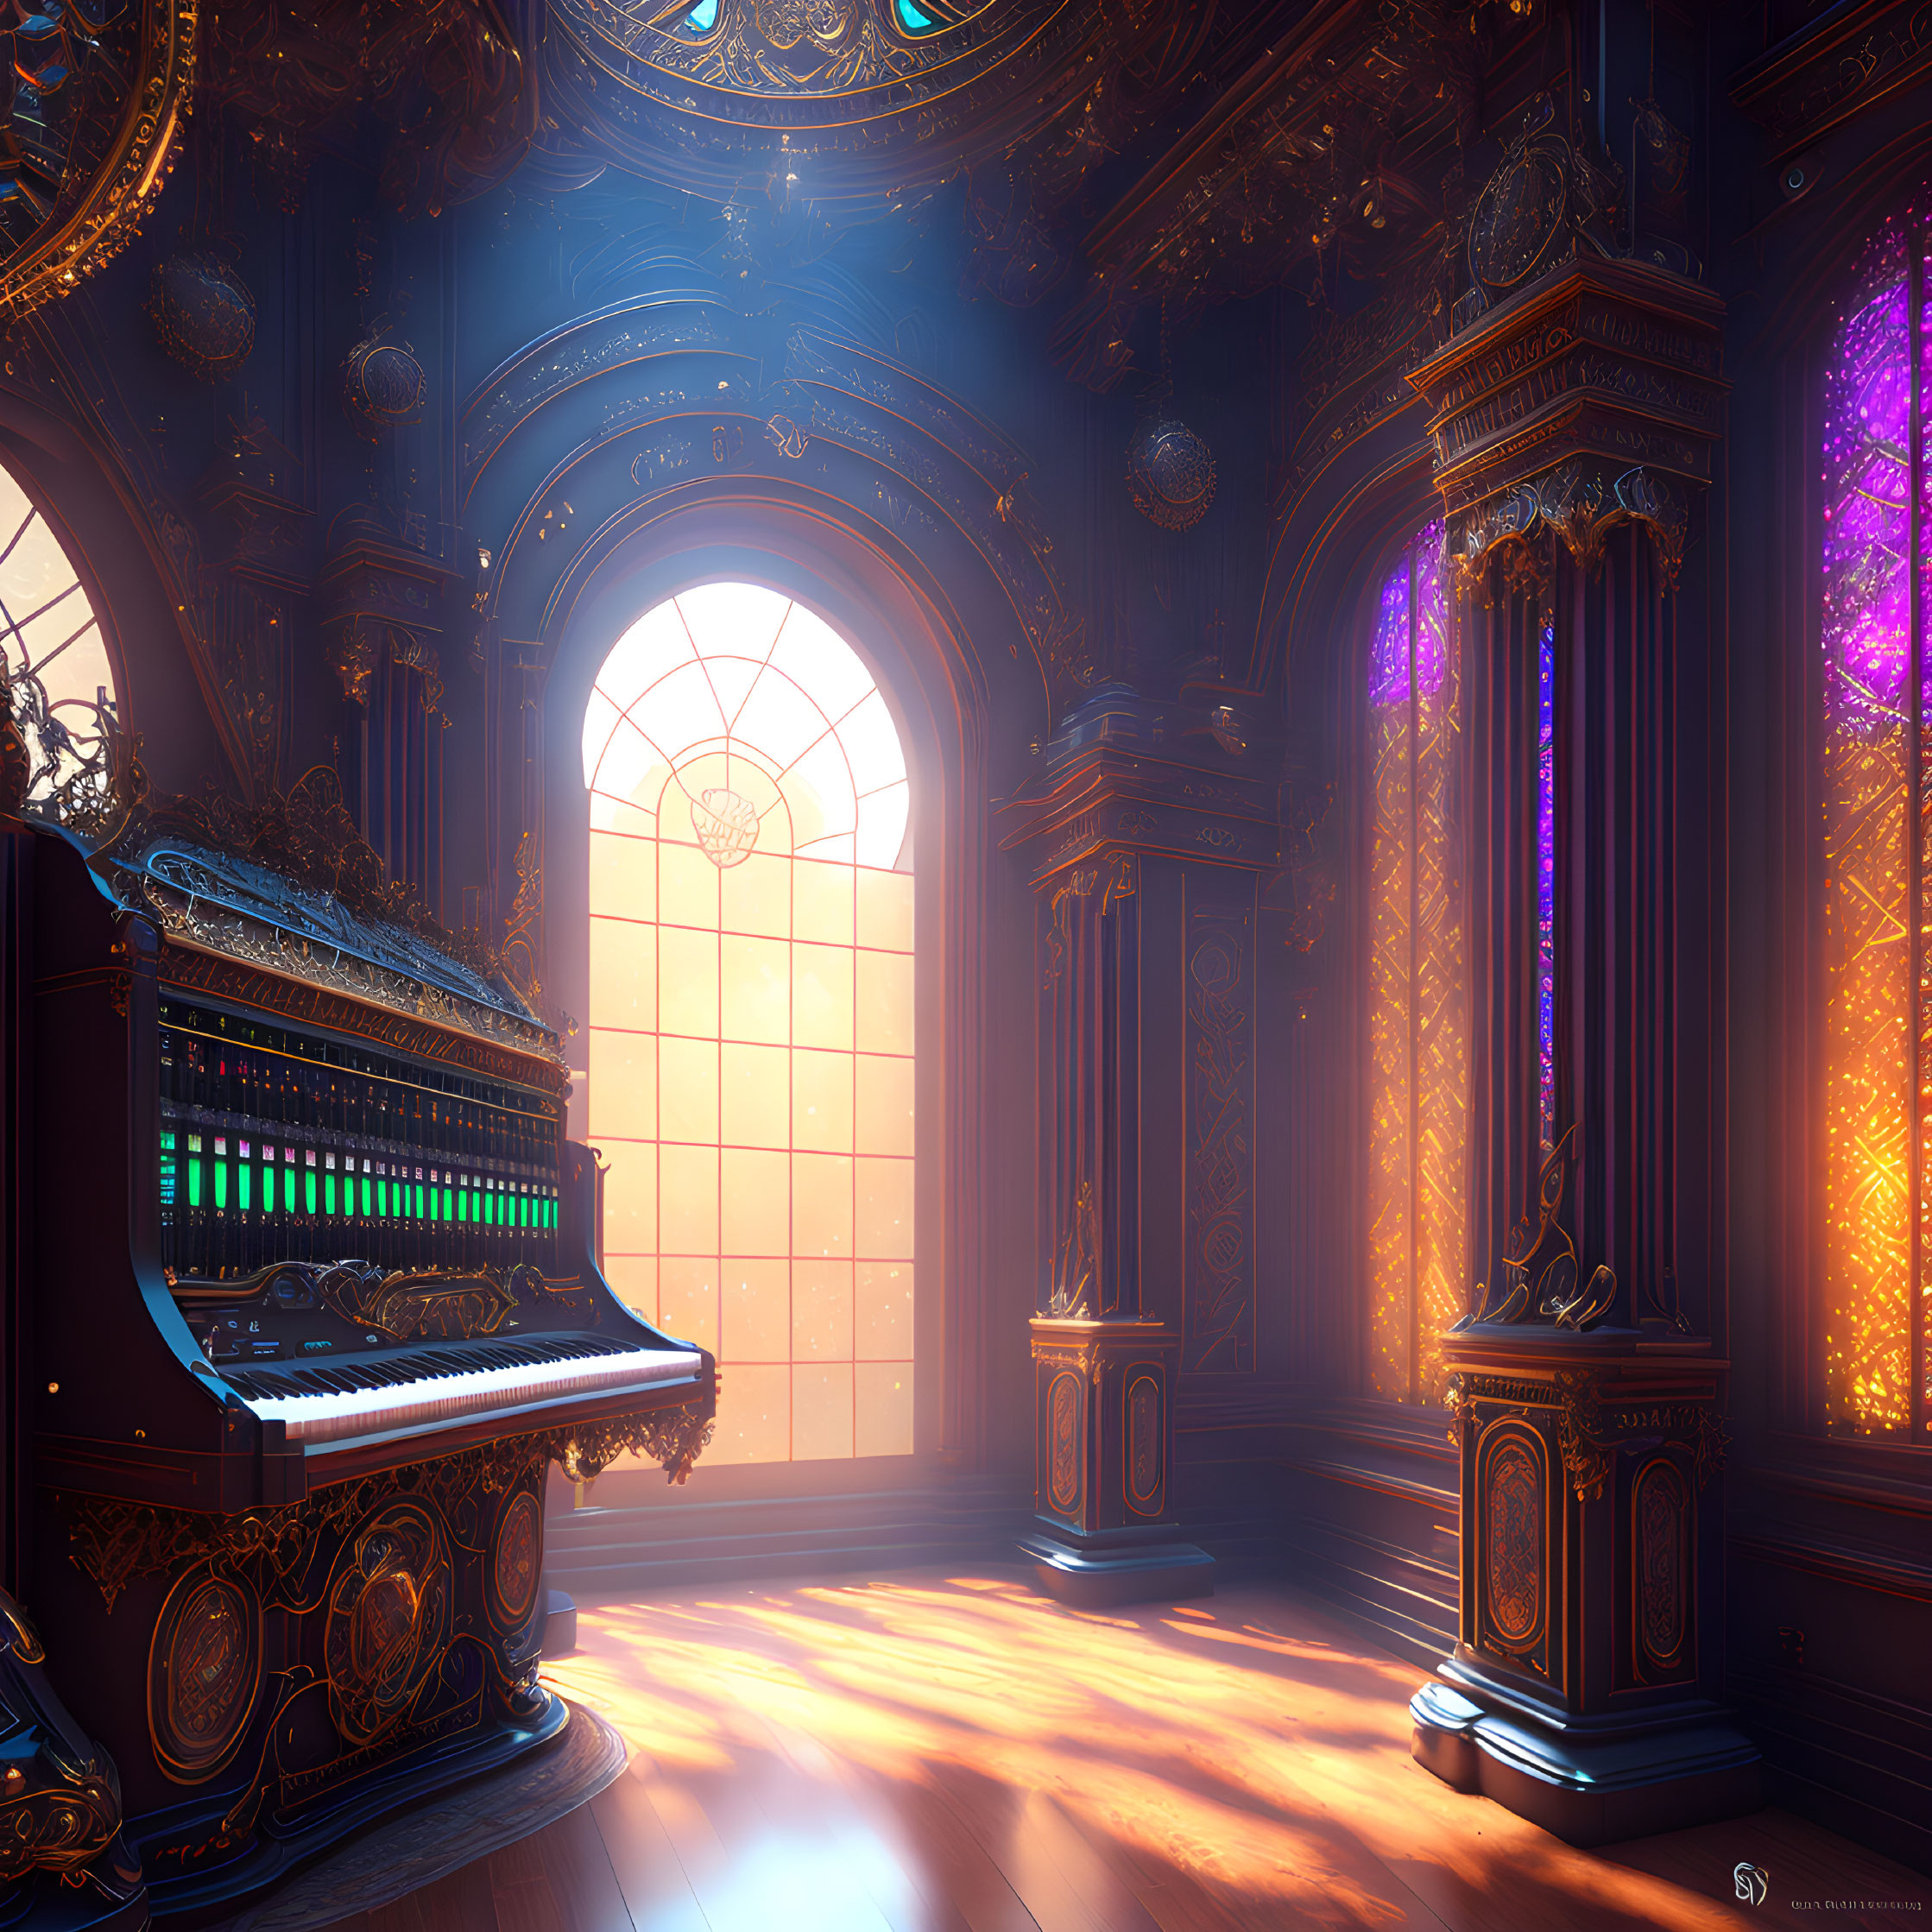 Sunlit ornate room with piano, stained glass windows, and intricate wooden details.